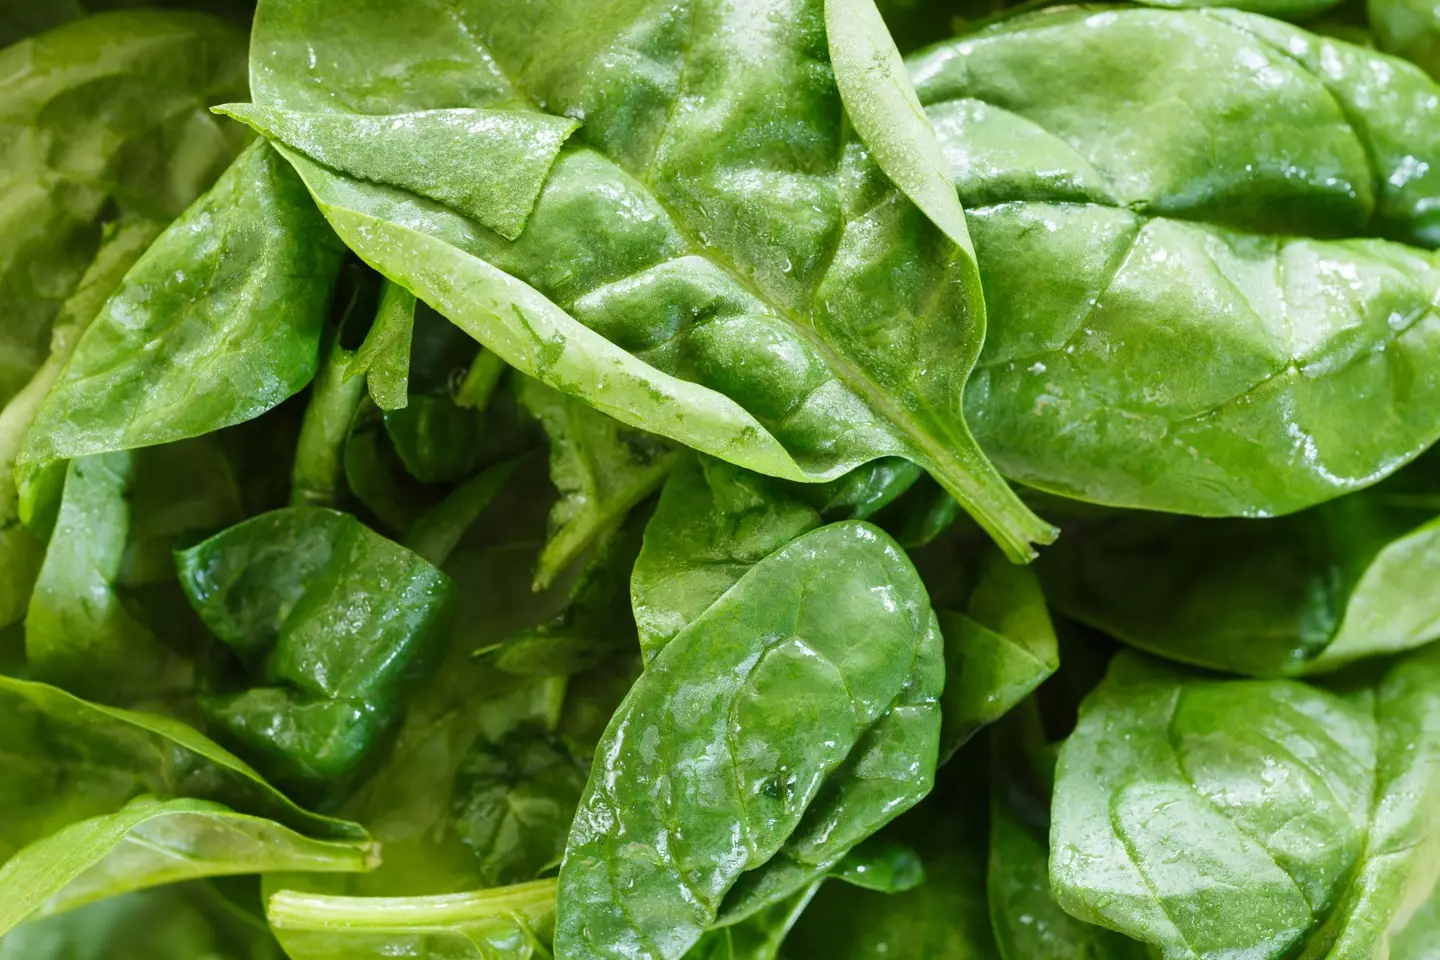 Anyone who has purchased a bag of the potentially toxic spinach has been told to throw it away.